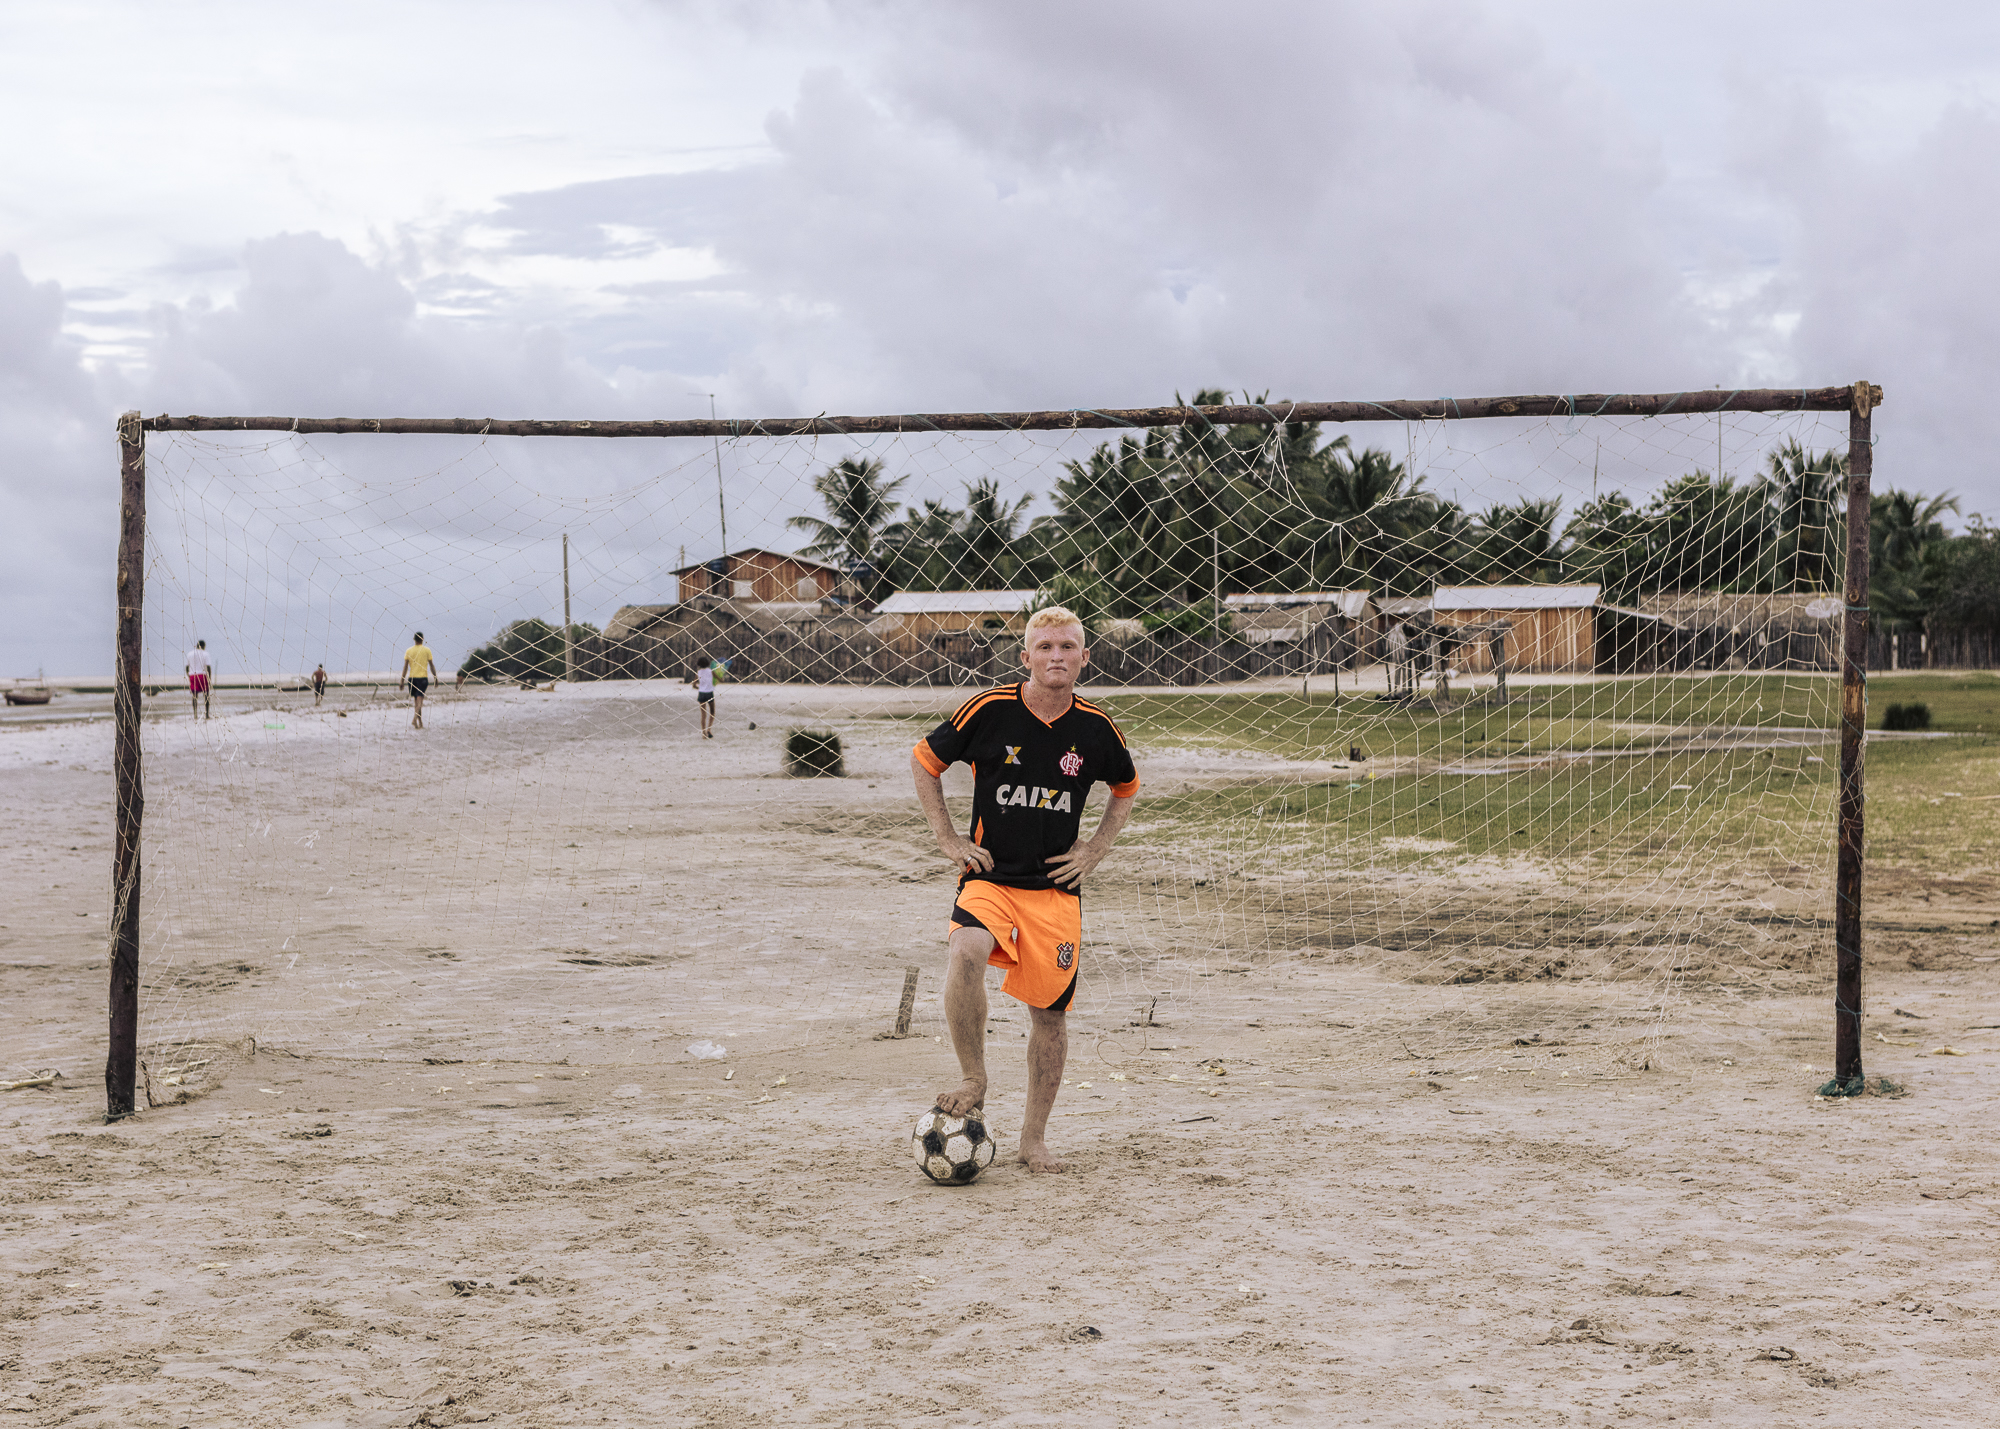 Due to the strong sun and the albinism, Sanã is only able to play soccer when the sun sets.